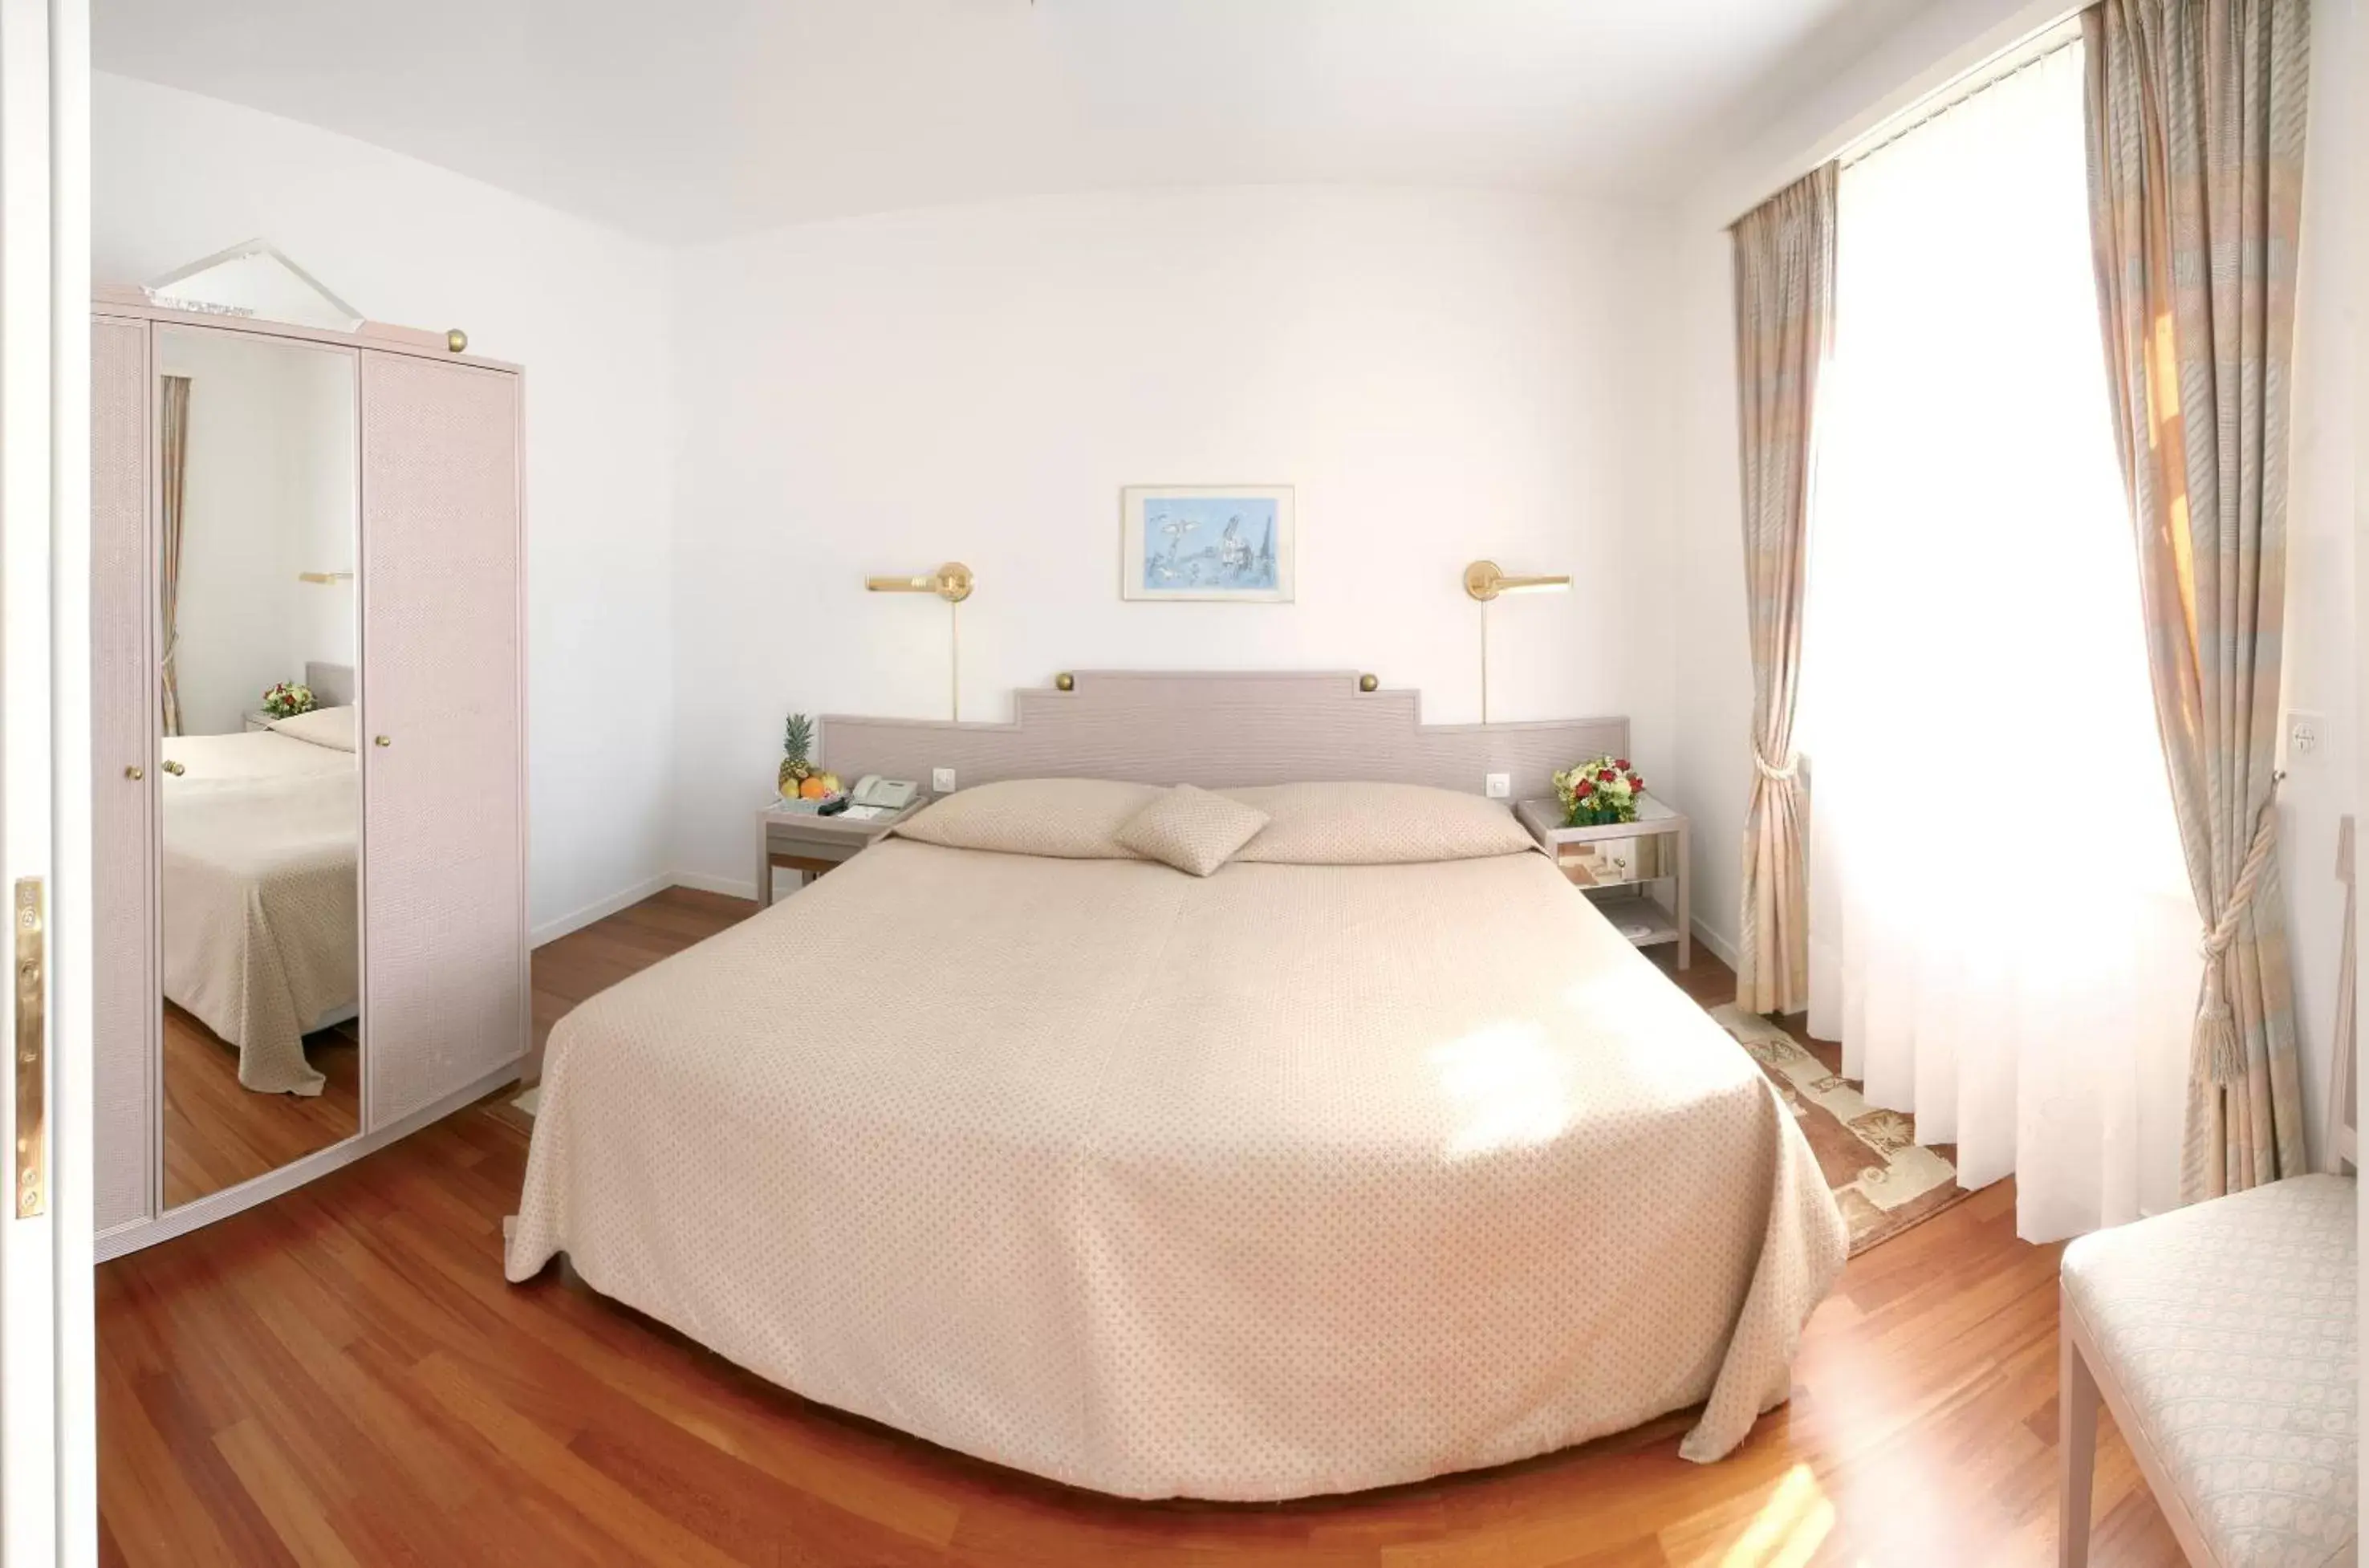 Bed in Villa Sassa Hotel, Residence & Spa - Ticino Hotels Group